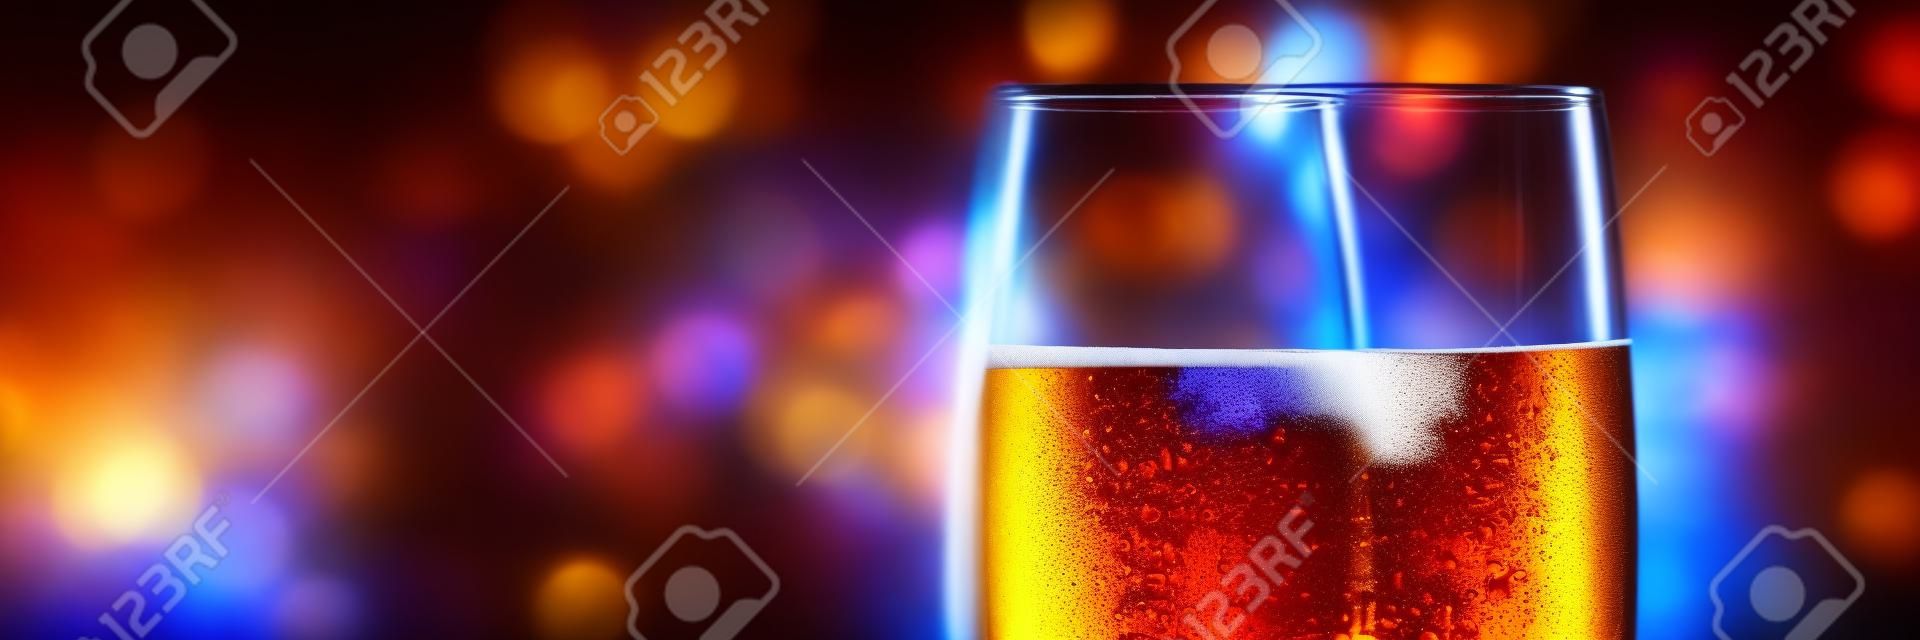 full glass of beer on blurred lights background panorama